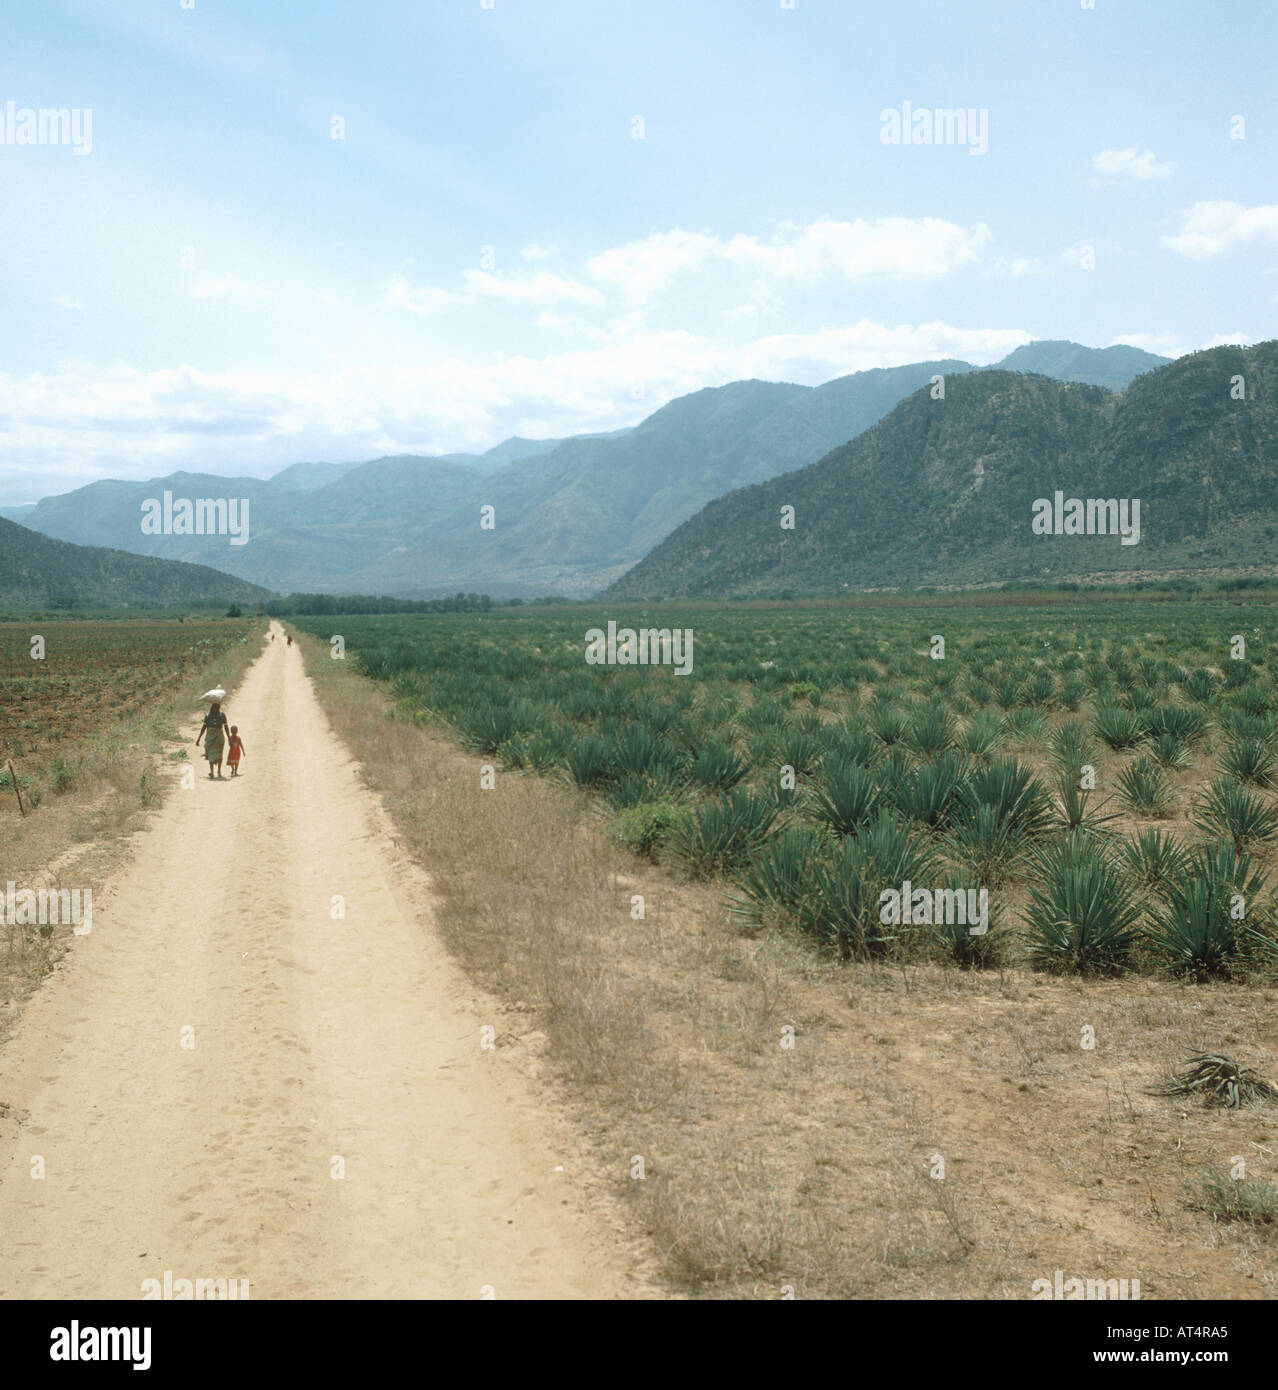 View of extensive young sisal plantation with people walking on dust road Tanzania Stock Photo